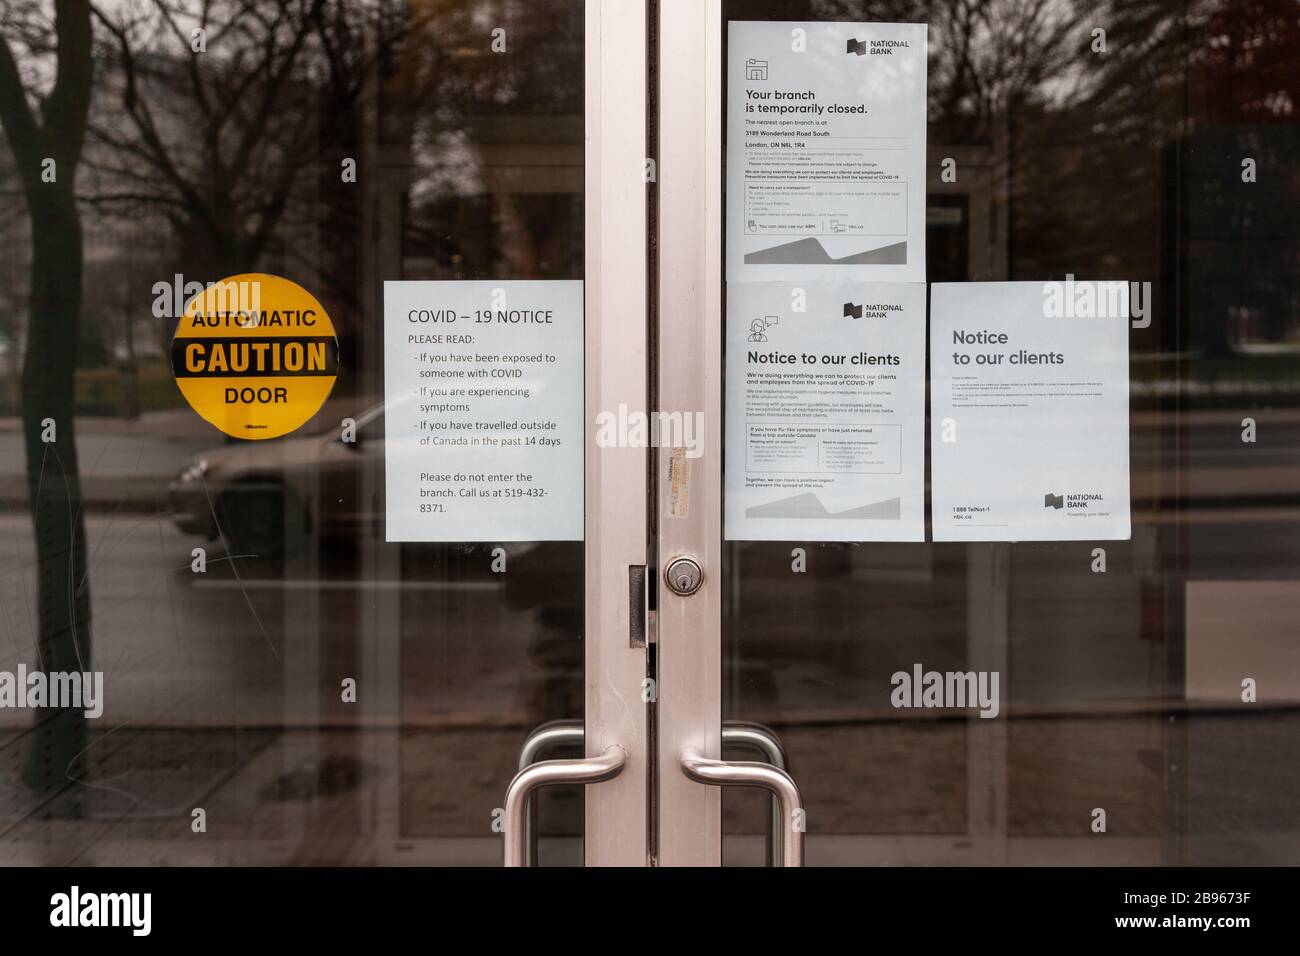 Notices on the doors of a bank branch in downtown London, Ontario, Canada informs customers the branch is closed due to COVID19 Pandemic. Stock Photo